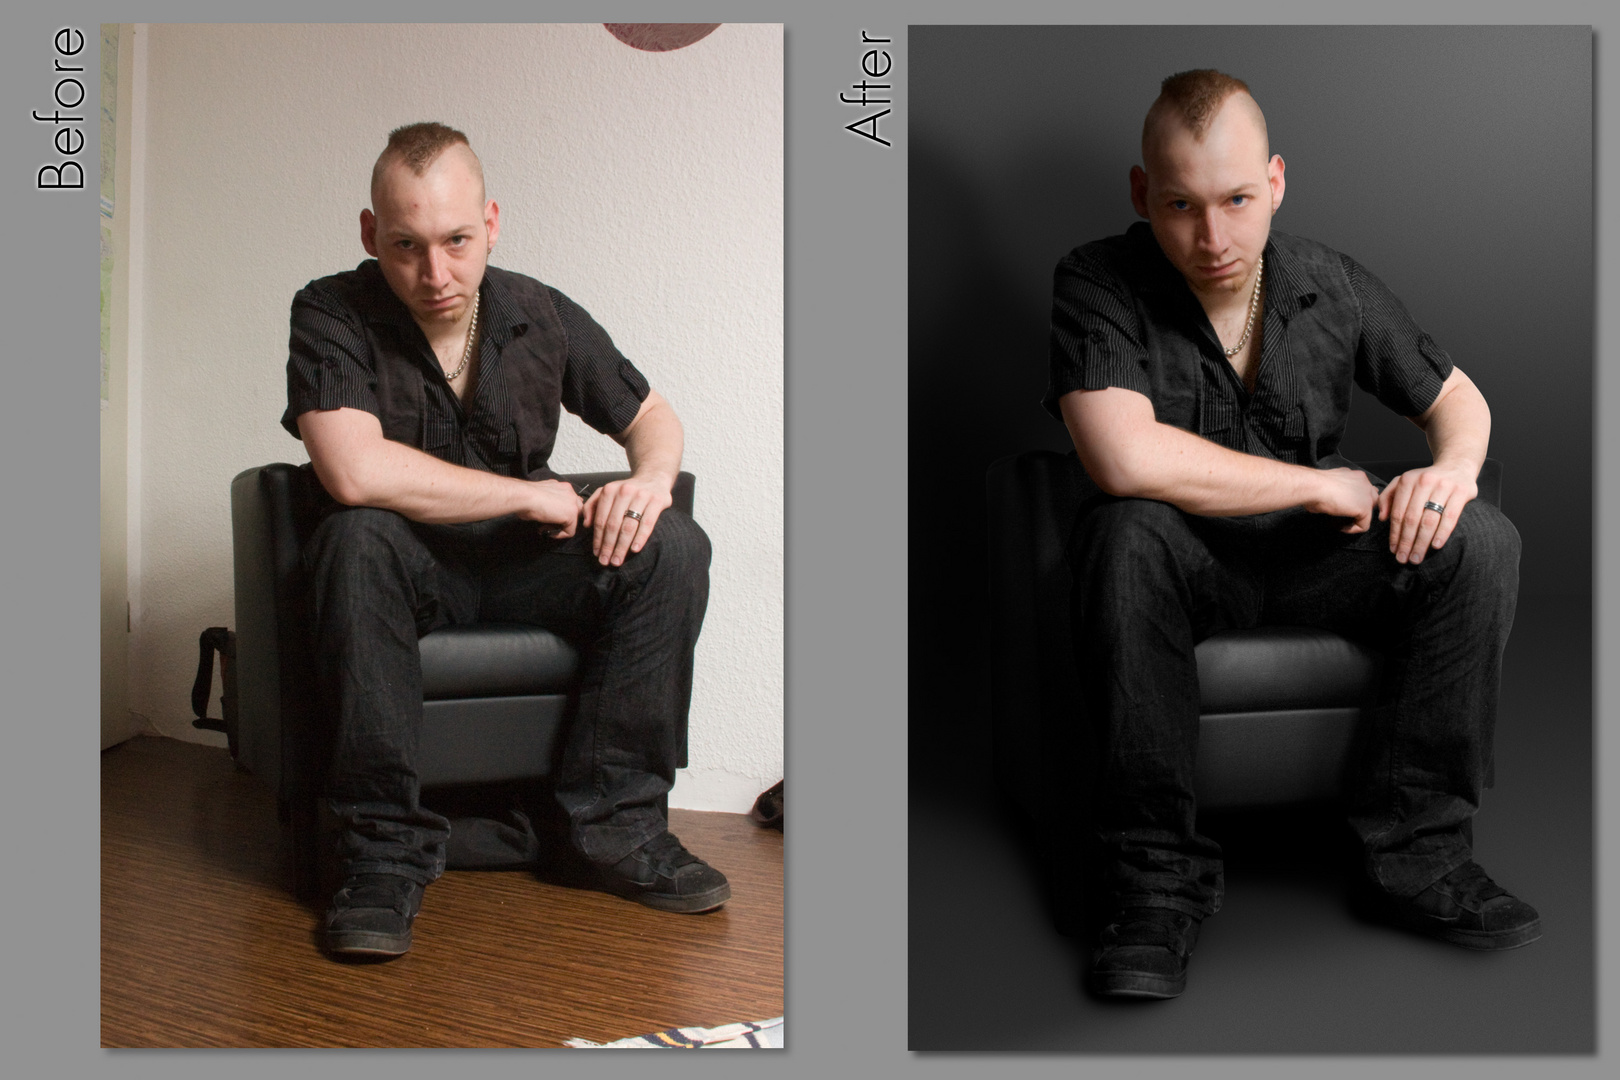 Selbstportrait Before and After